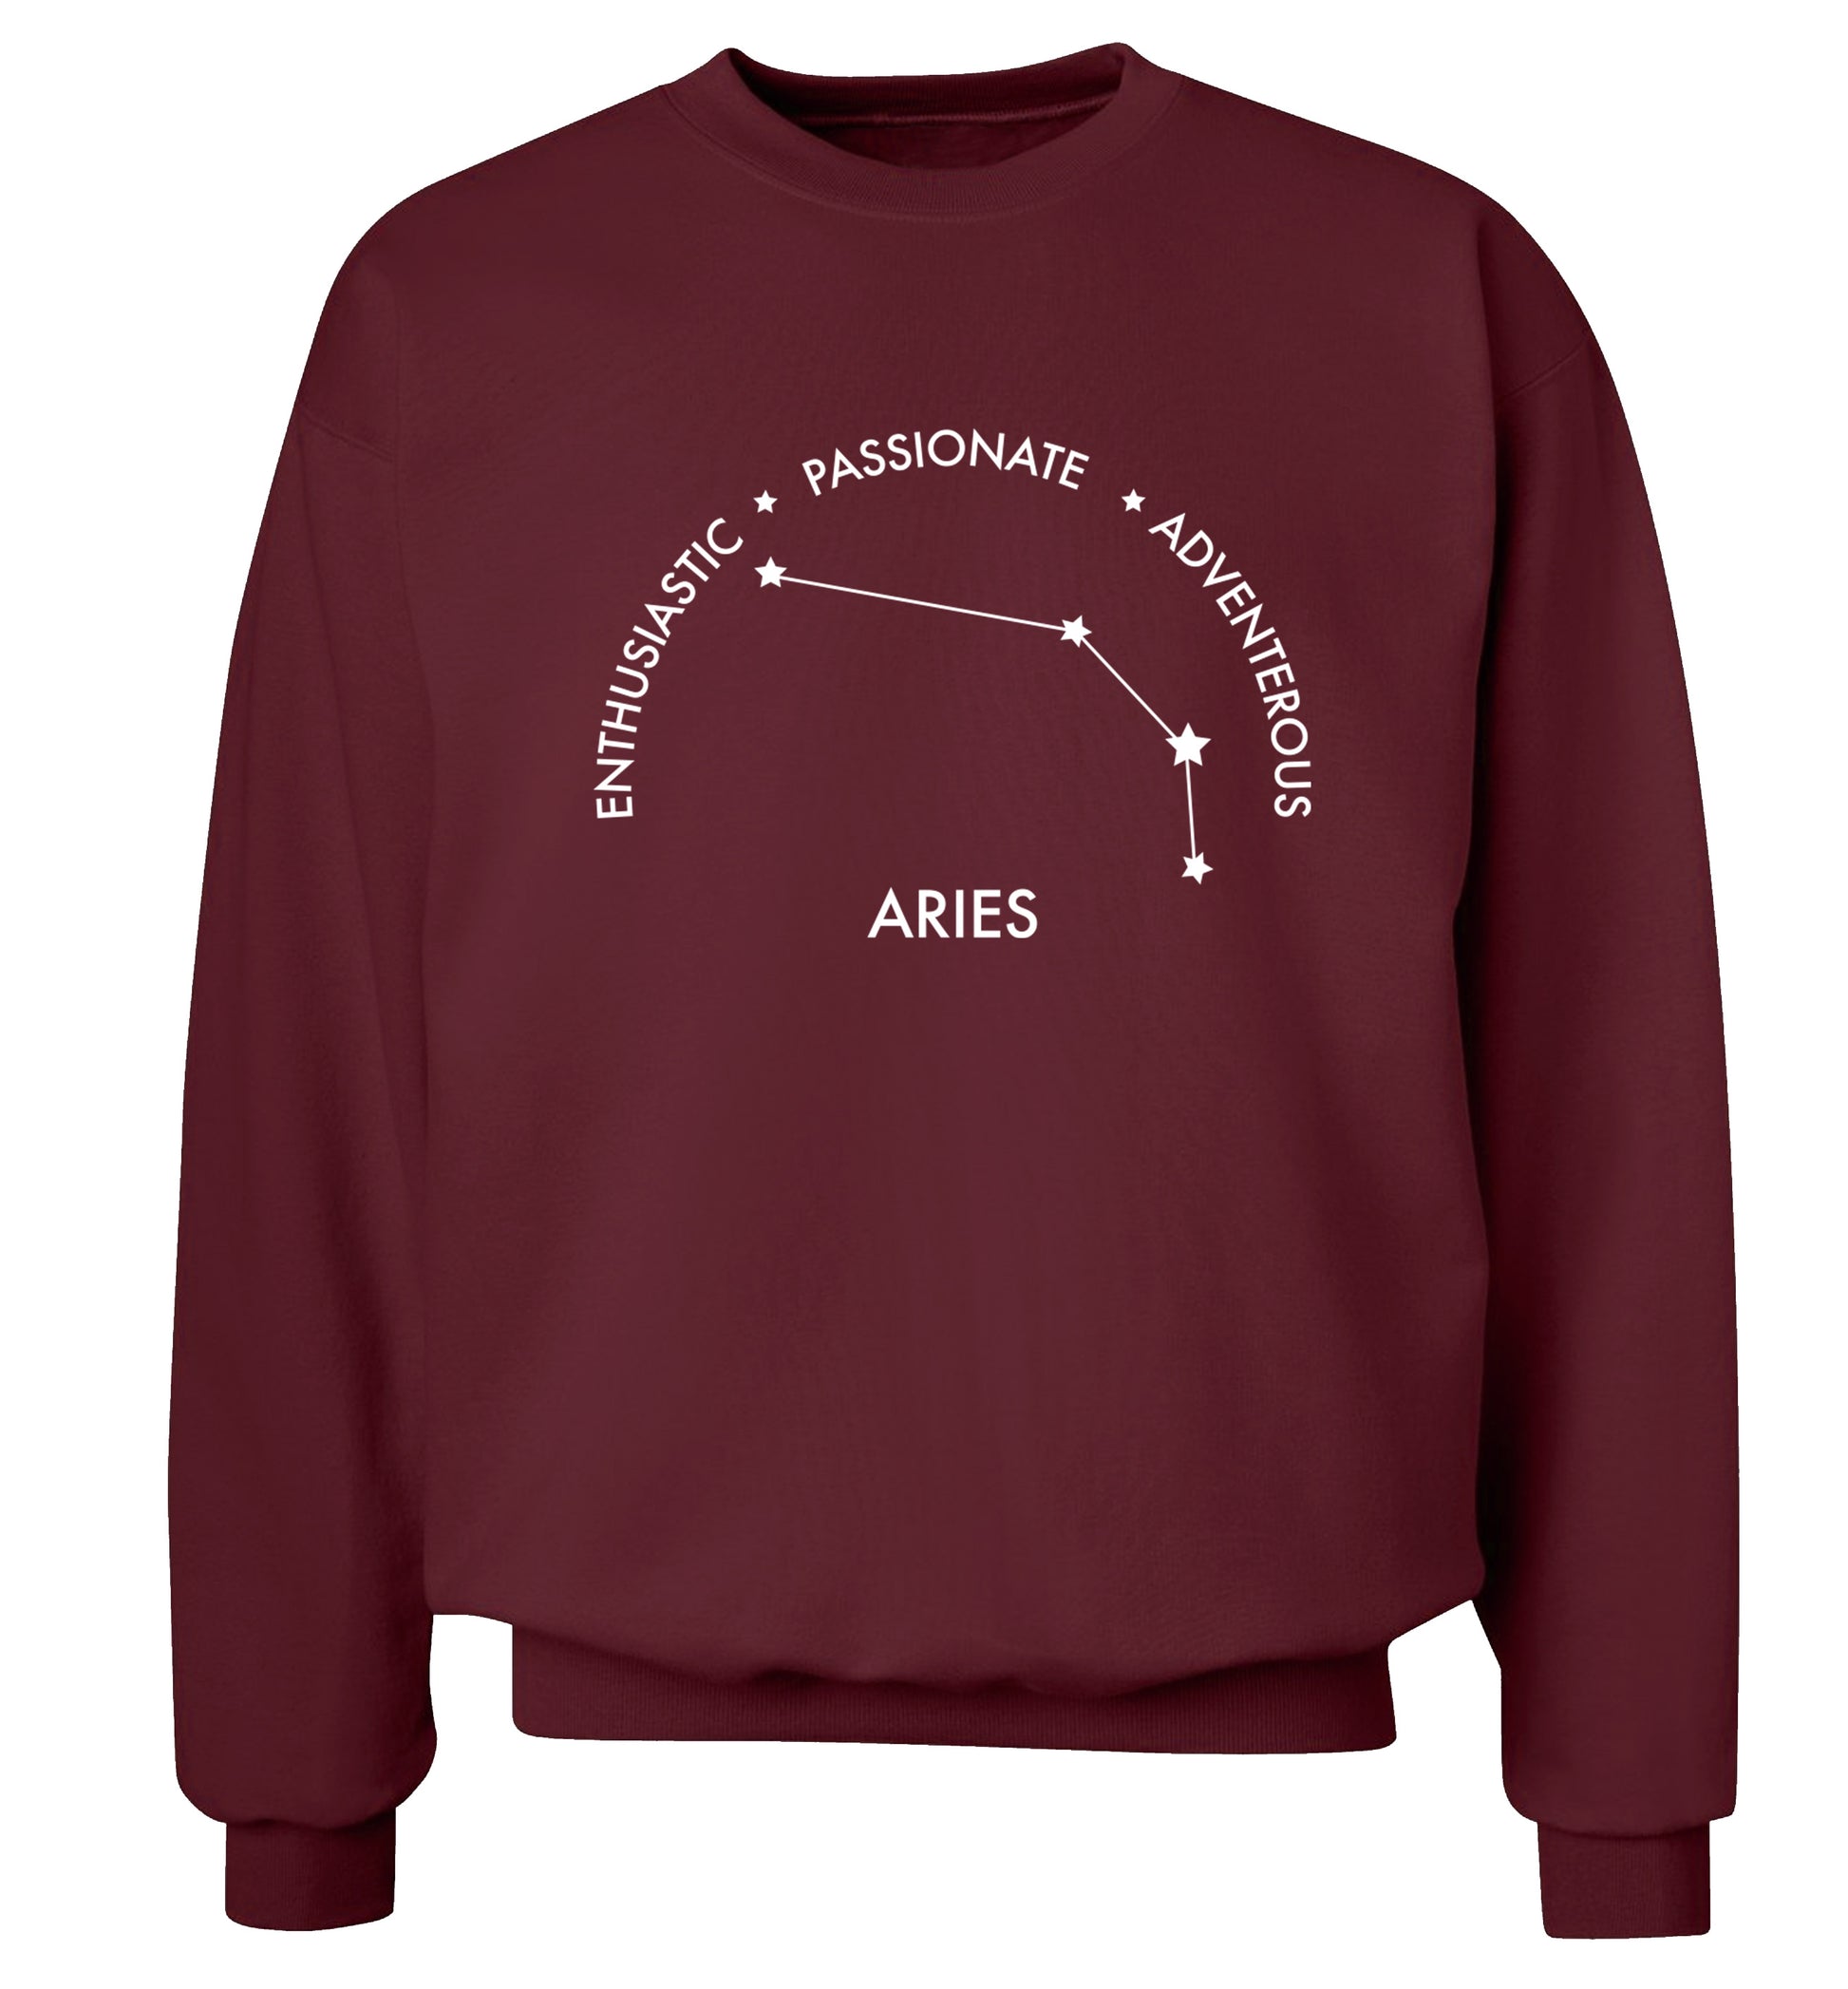 Aries enthusiastic | passionate | adventerous Adult's unisex maroon Sweater 2XL